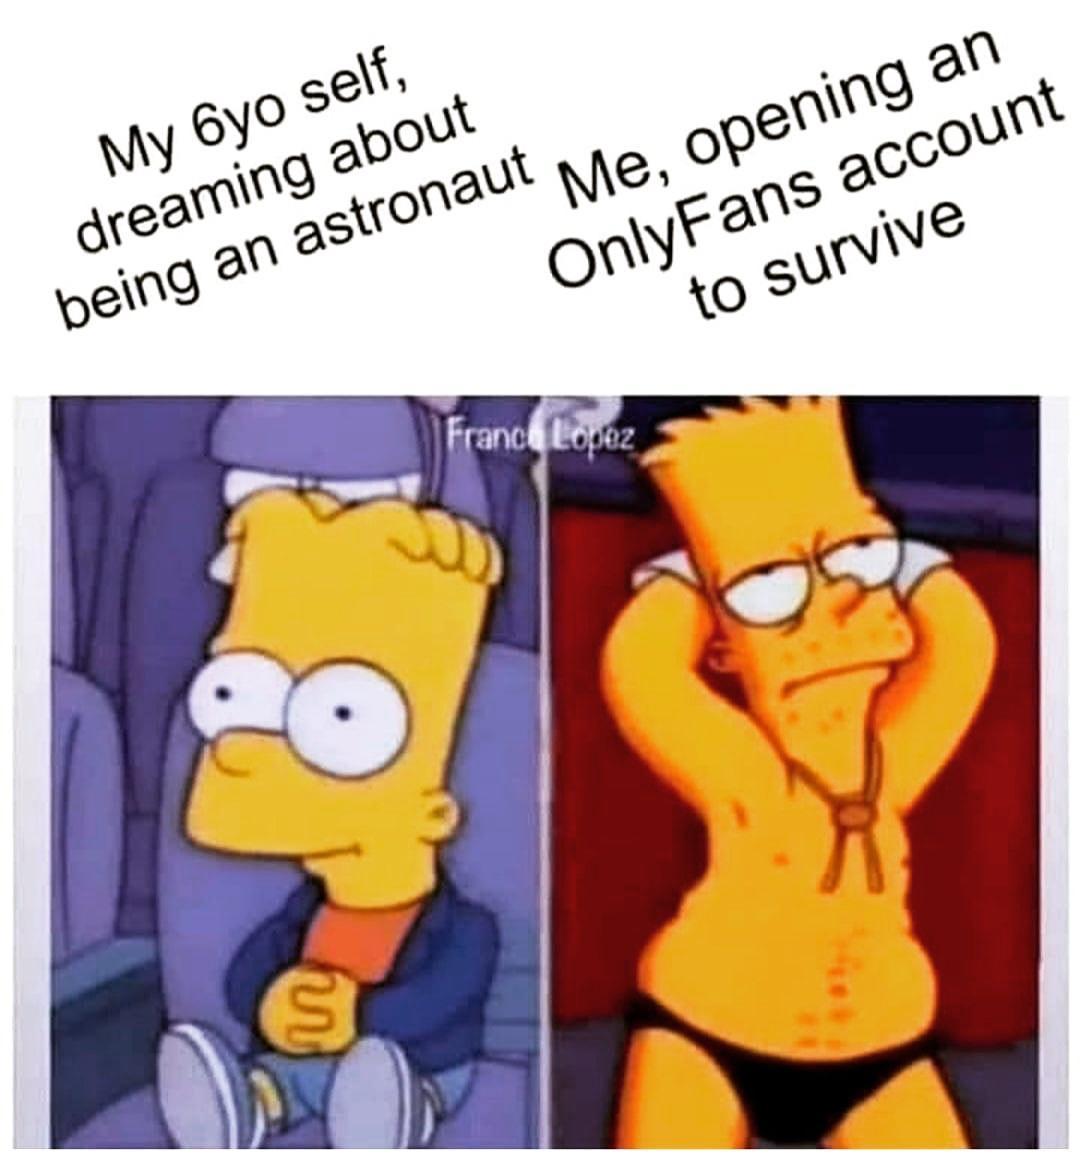 funny memes and random pics - cartoon - My Oyo self, dreaming about being an astronaut Me, opening an OnlyFans account to survive France Lopez s